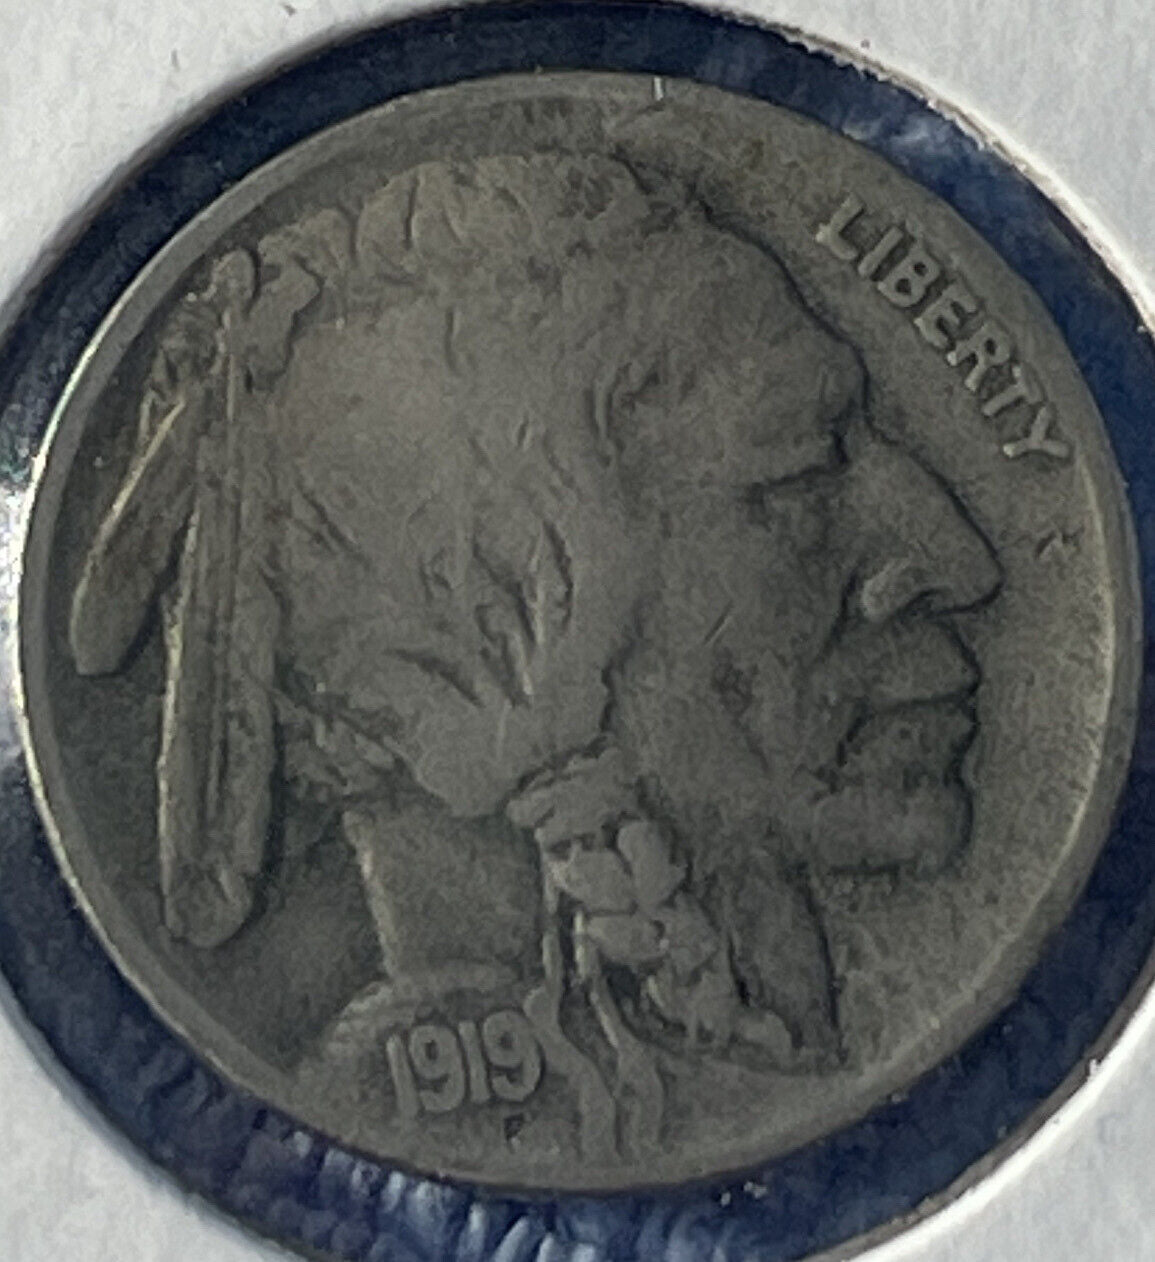 1919s Indian/Buffalo Nickel Fine ++ nice features tough date in this condition